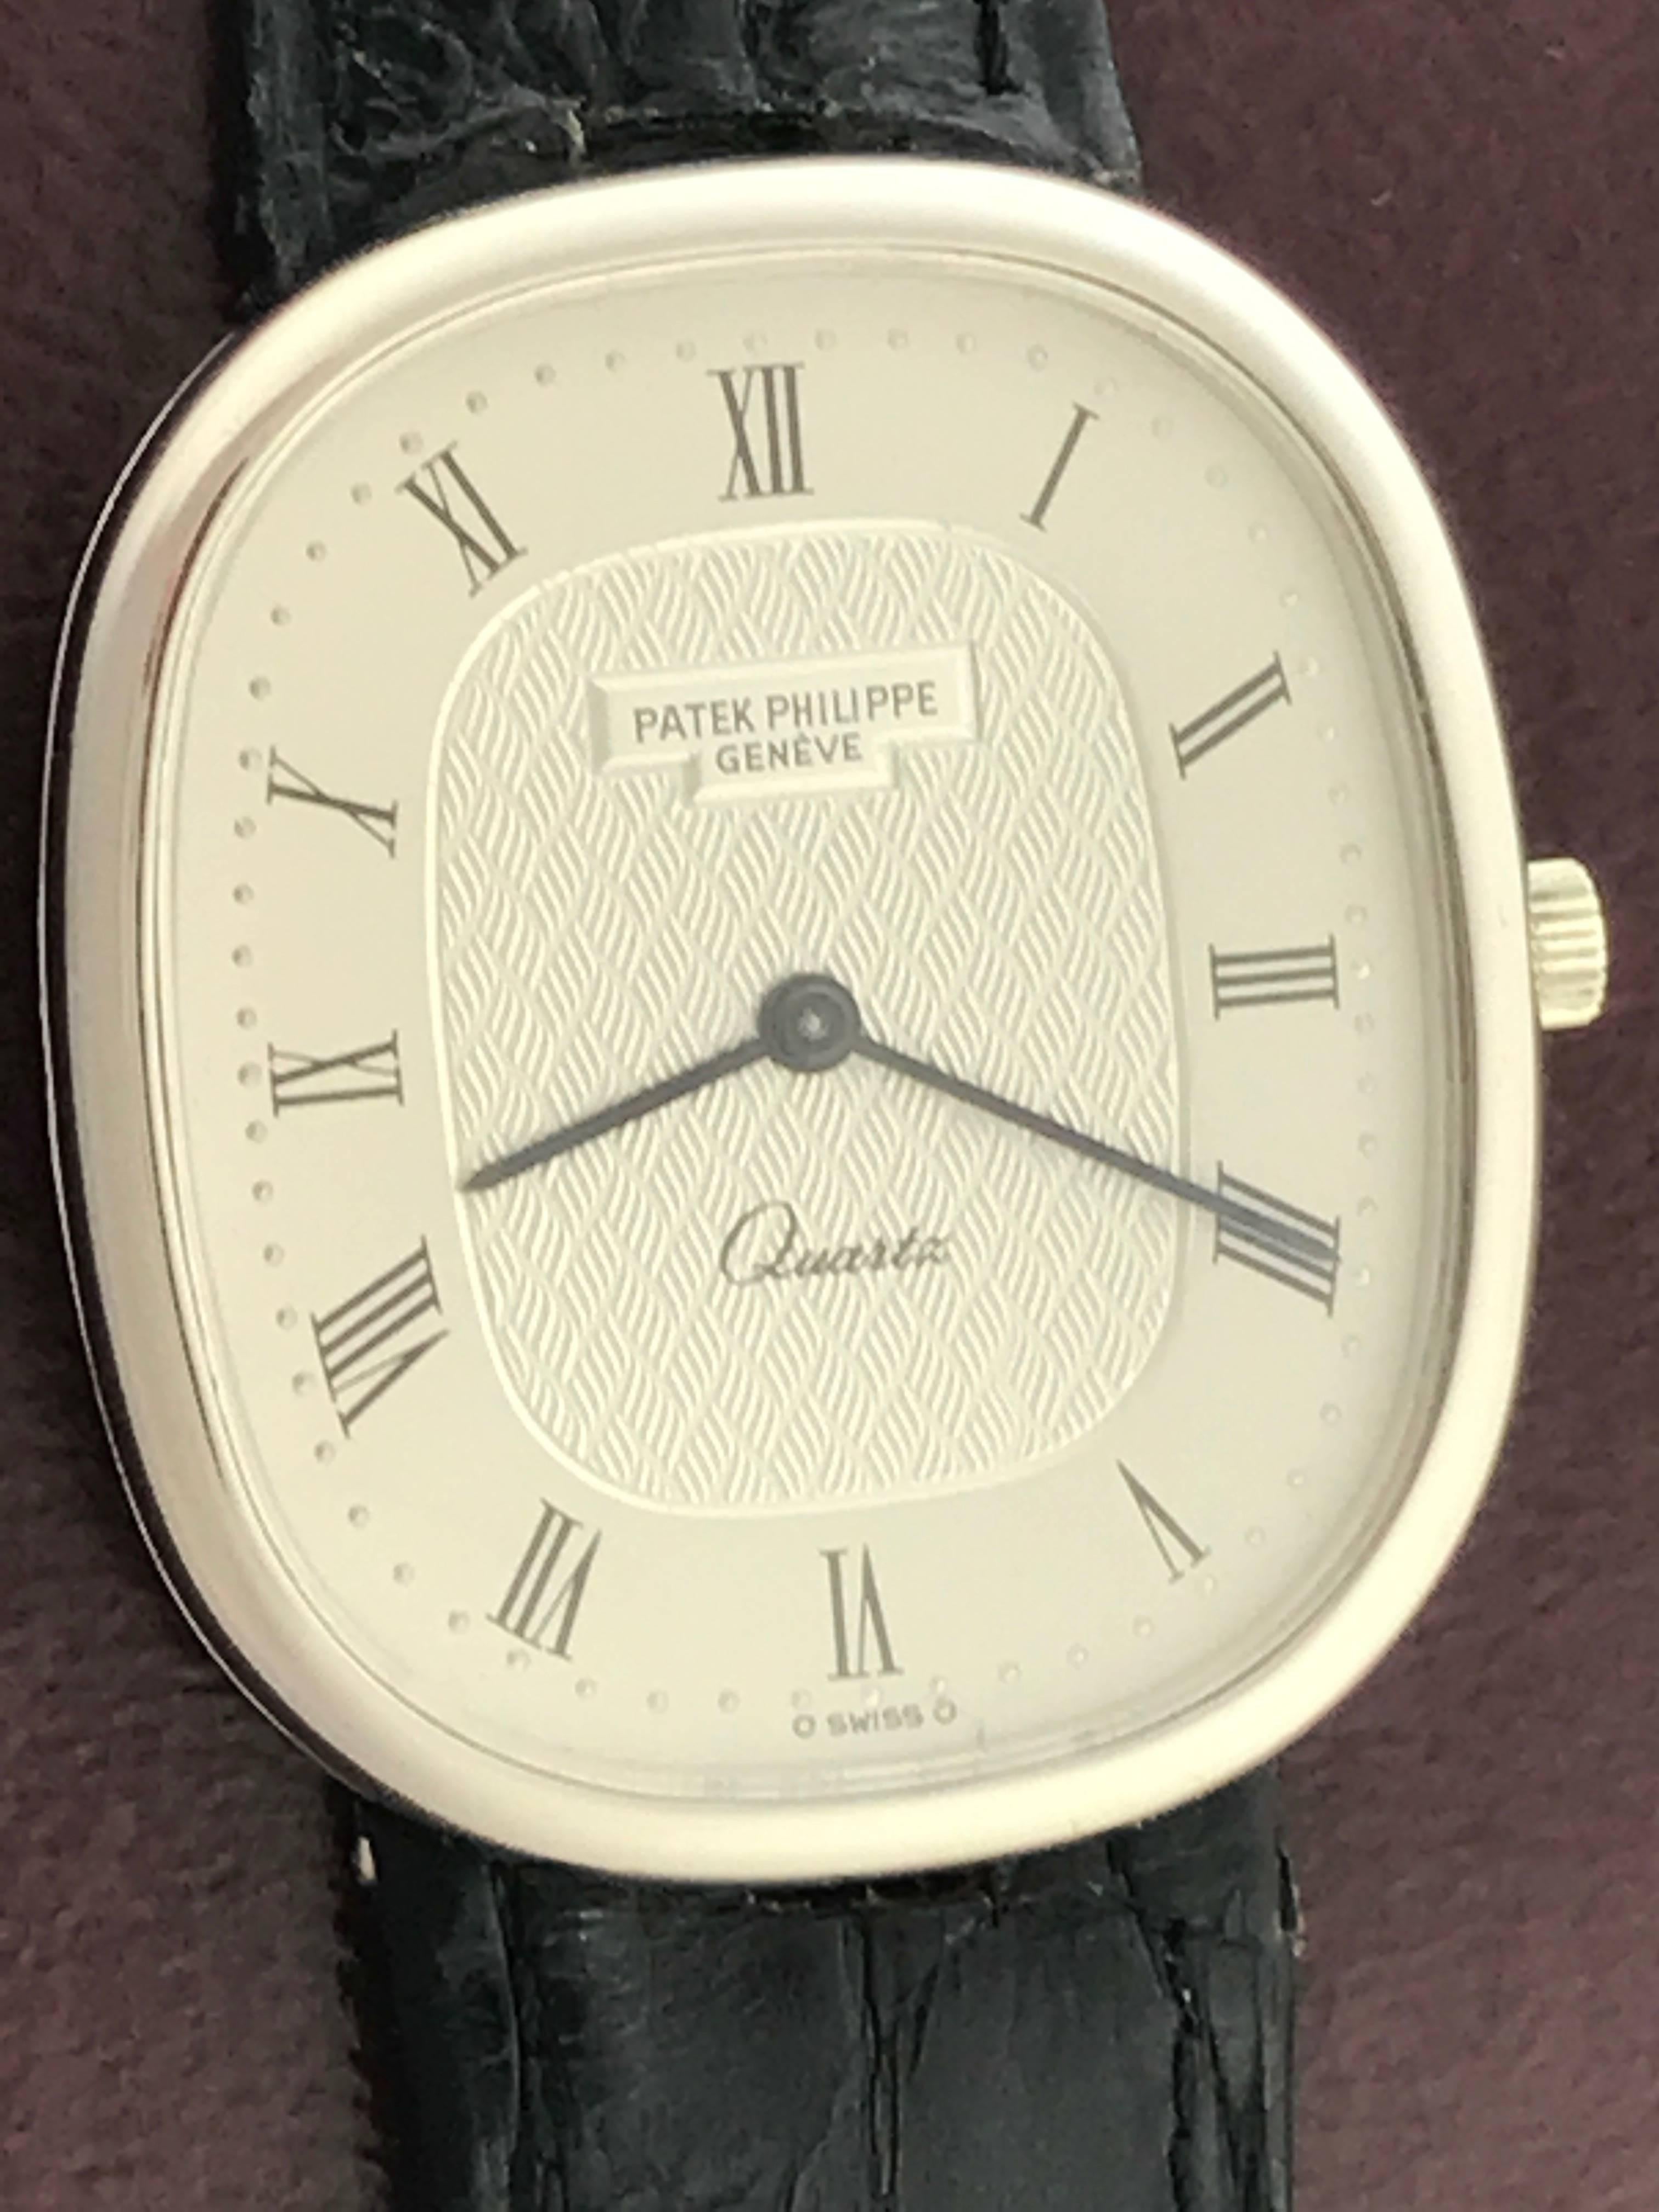 Patek Philippe Men's 3838 Wrist Watch in 18K White  Gold. This is an heirloom piece you can pass down for generations.  This timepiece features an 18K white Gold ellipse case, measuring 31x35mm in diameter.  Silvered Dial with black roman numeral